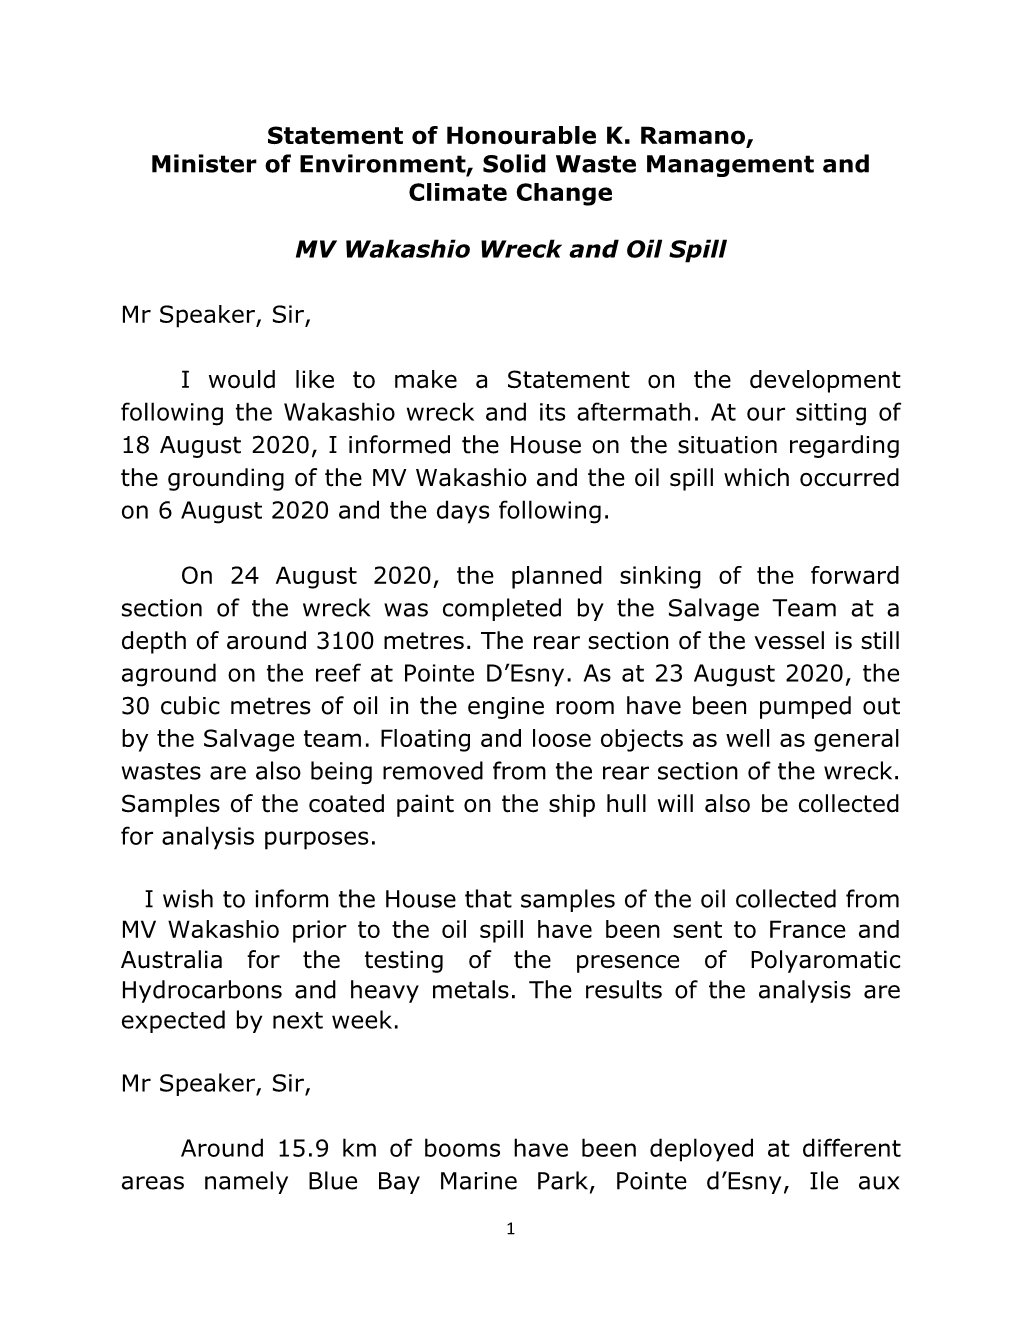 Statement of Honourable K. Ramano, Minister of Environment, Solid Waste Management and Climate Change